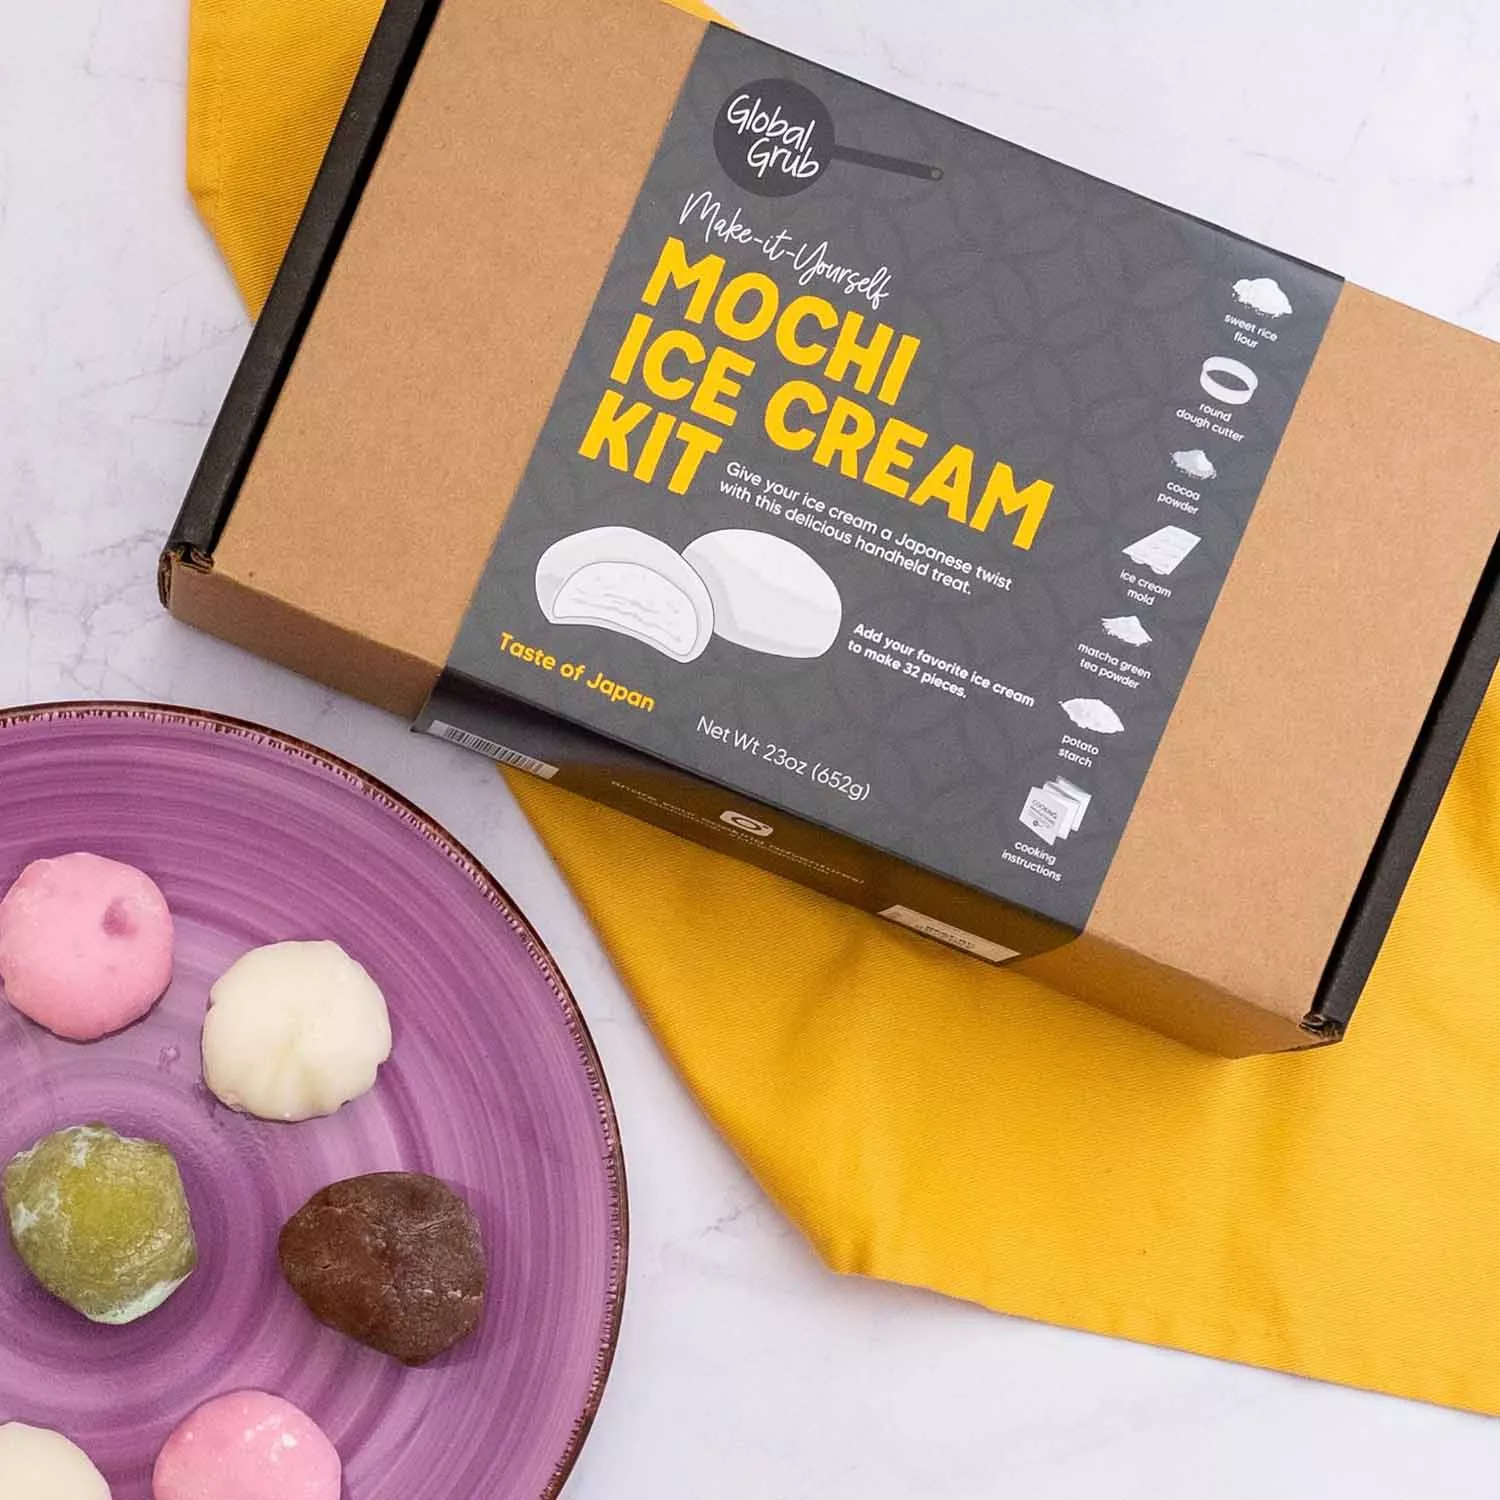 Weekend goals 😍. Get your DIY Mochi Ice Cream Kit before it sells out,  again! 📹 cred: special thanks to our wonderful partners at @uncommongoods # mochi, By Global Grub